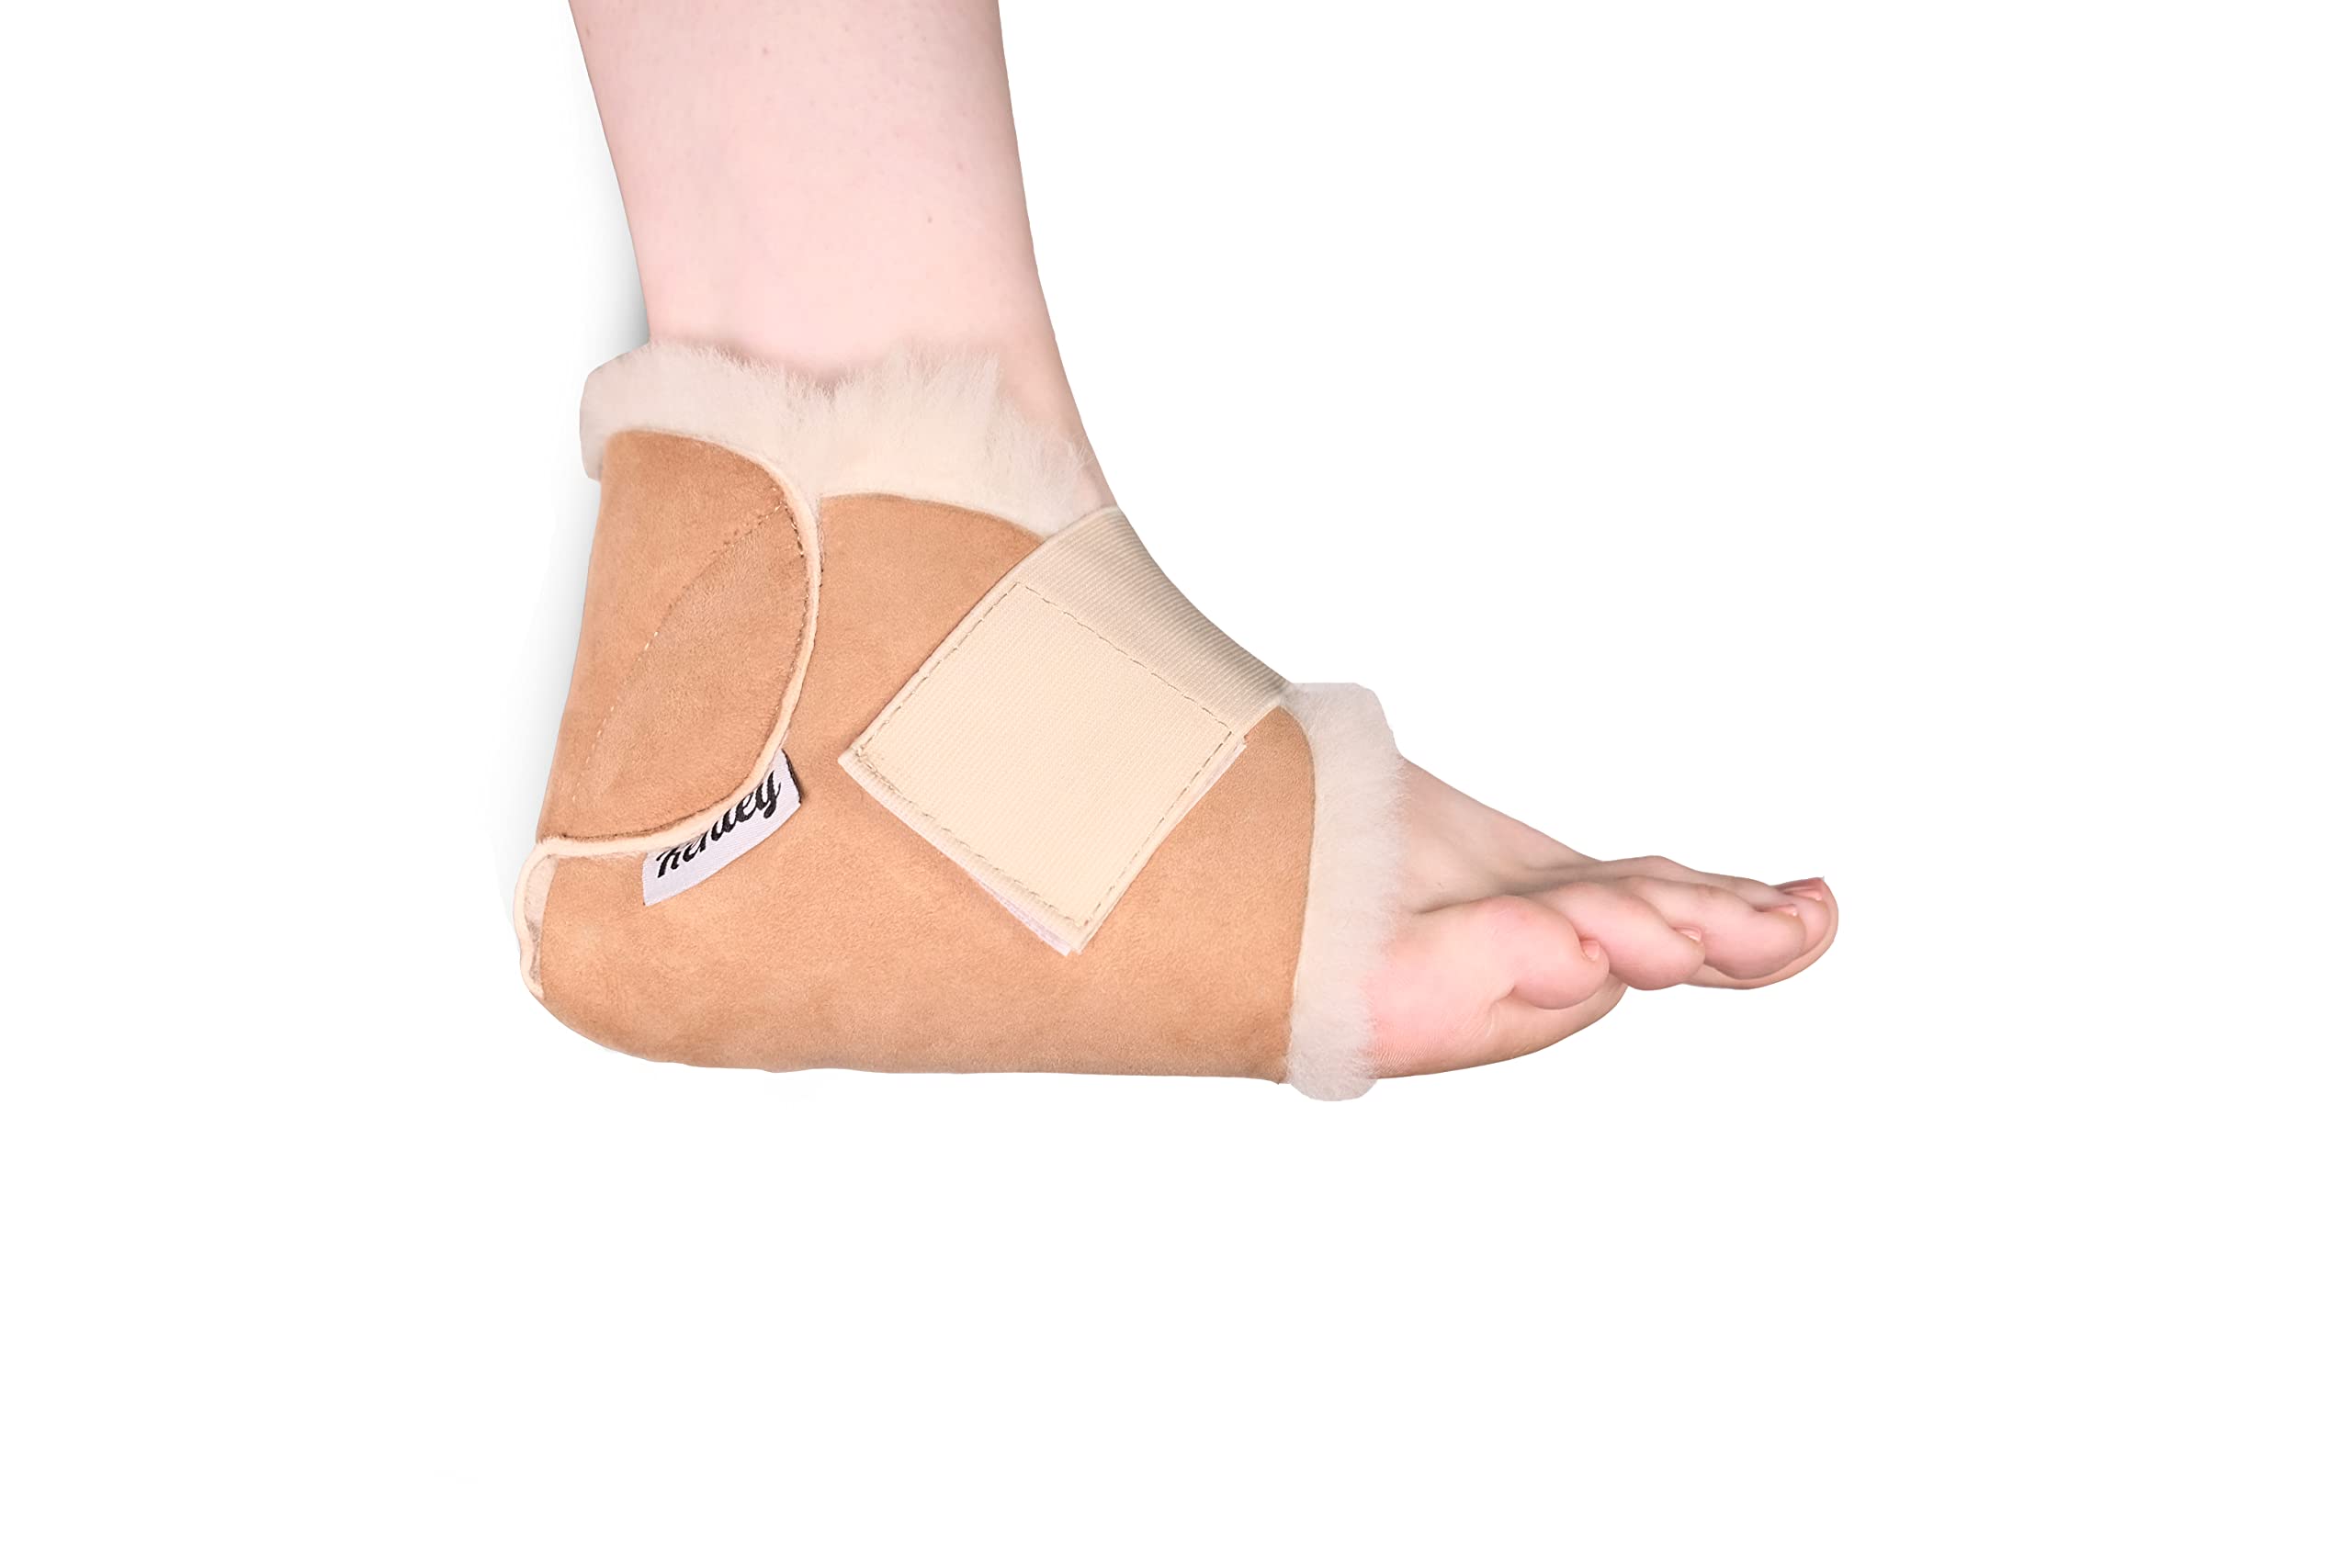 Ulcer Solutions Ankle Keeper Ankle Protectors For Pressure Sores By Ankle  Protector / Foot Ankle Support - Buy Ulcer Solutions Ankle Keeper Ankle  Protectors For Pressure Sores By Ankle Protector / Foot